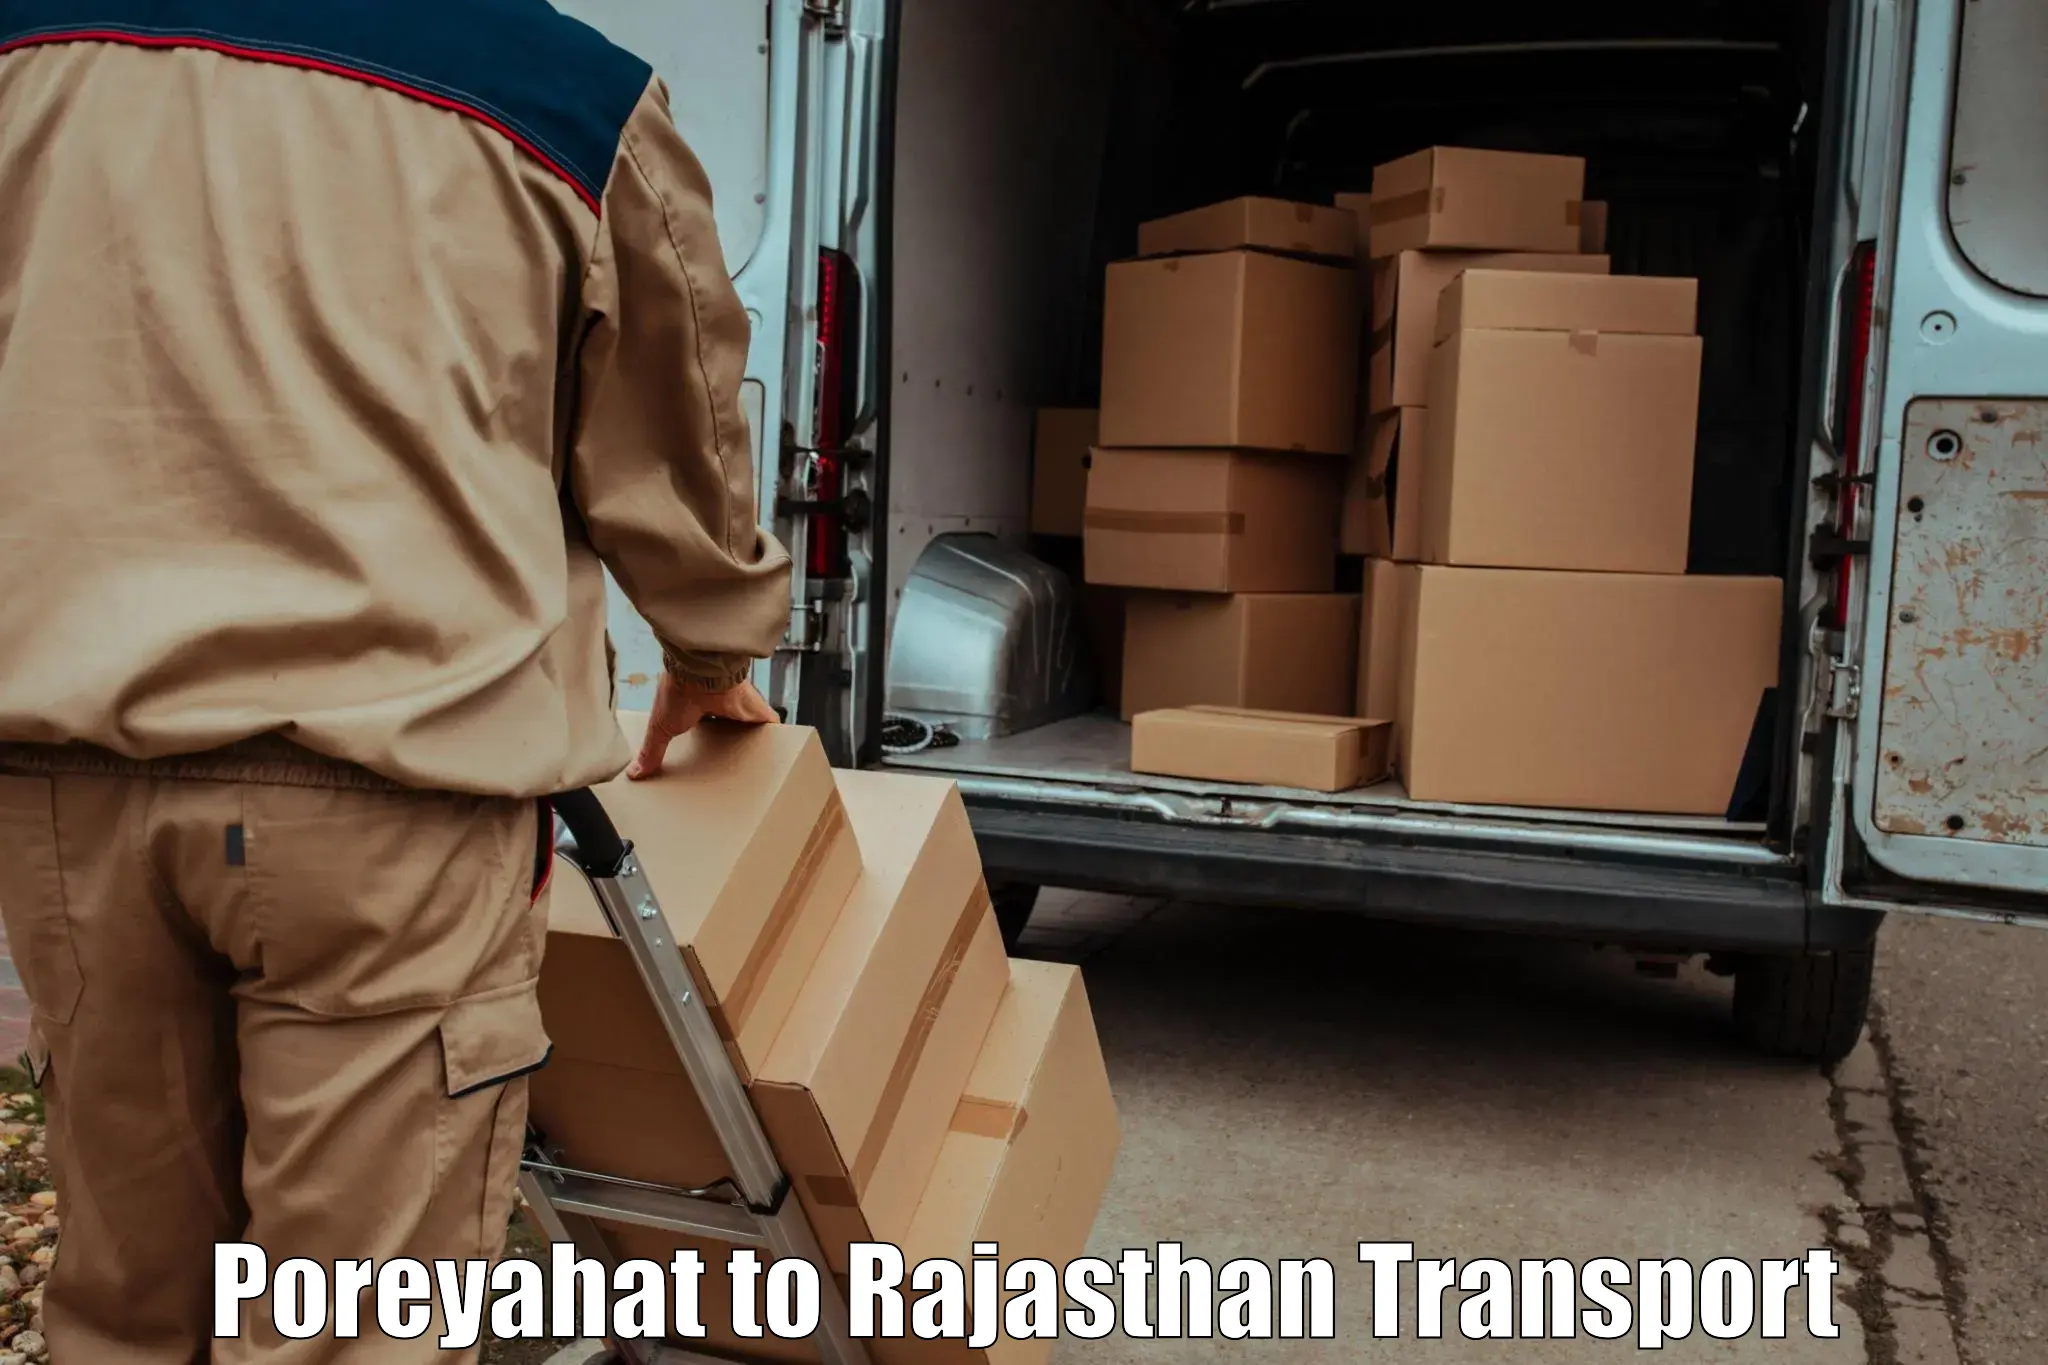 Air freight transport services Poreyahat to Asind